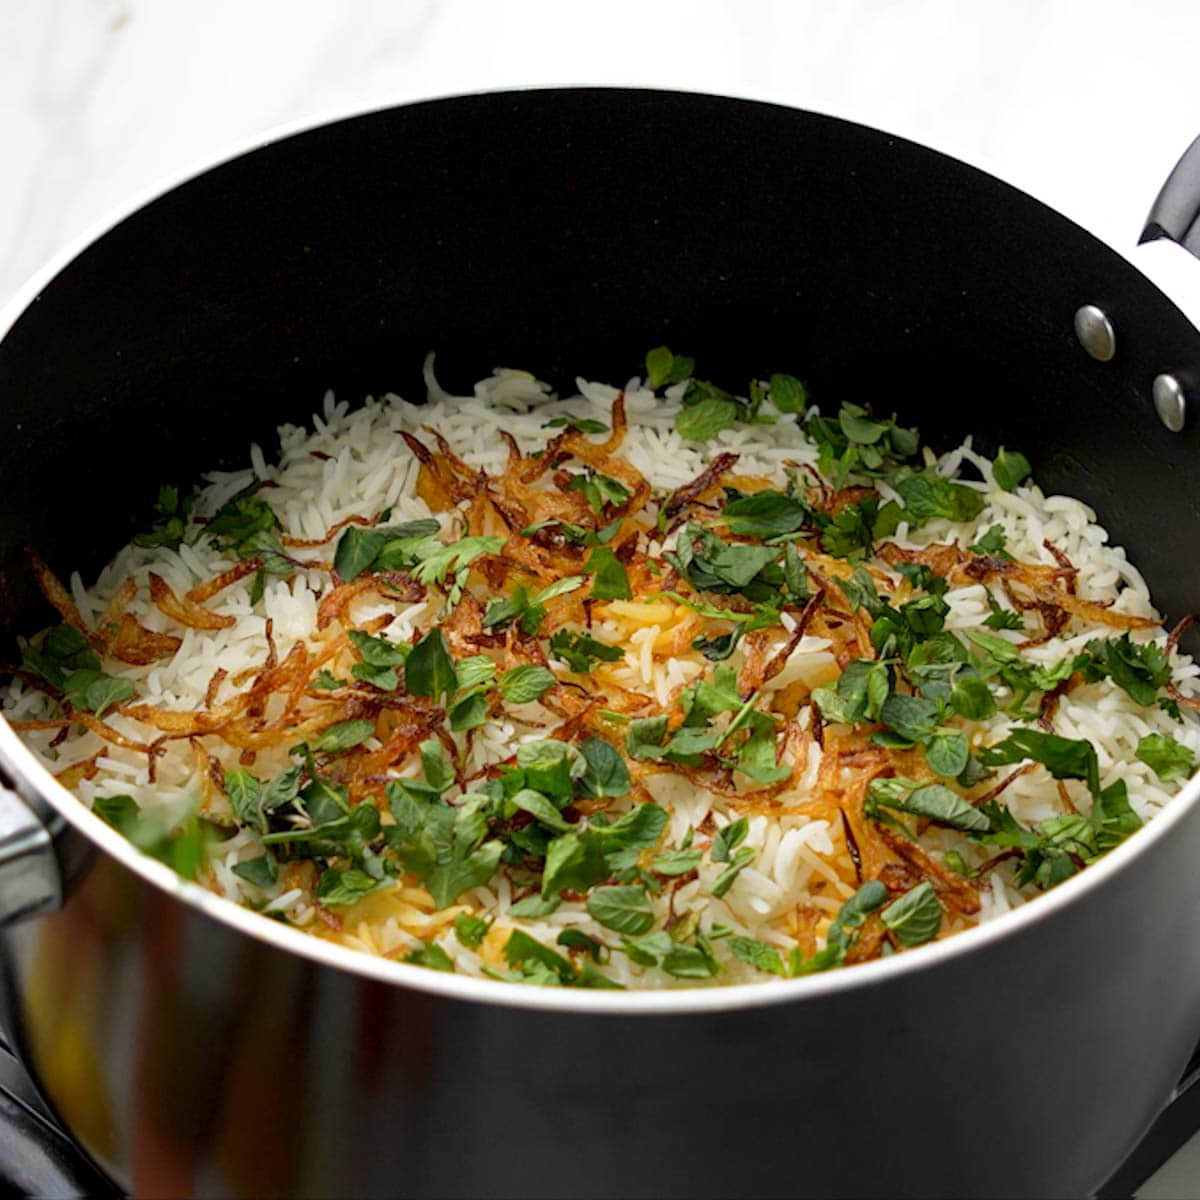 biryani topped with onion, mint and cilantro leaves